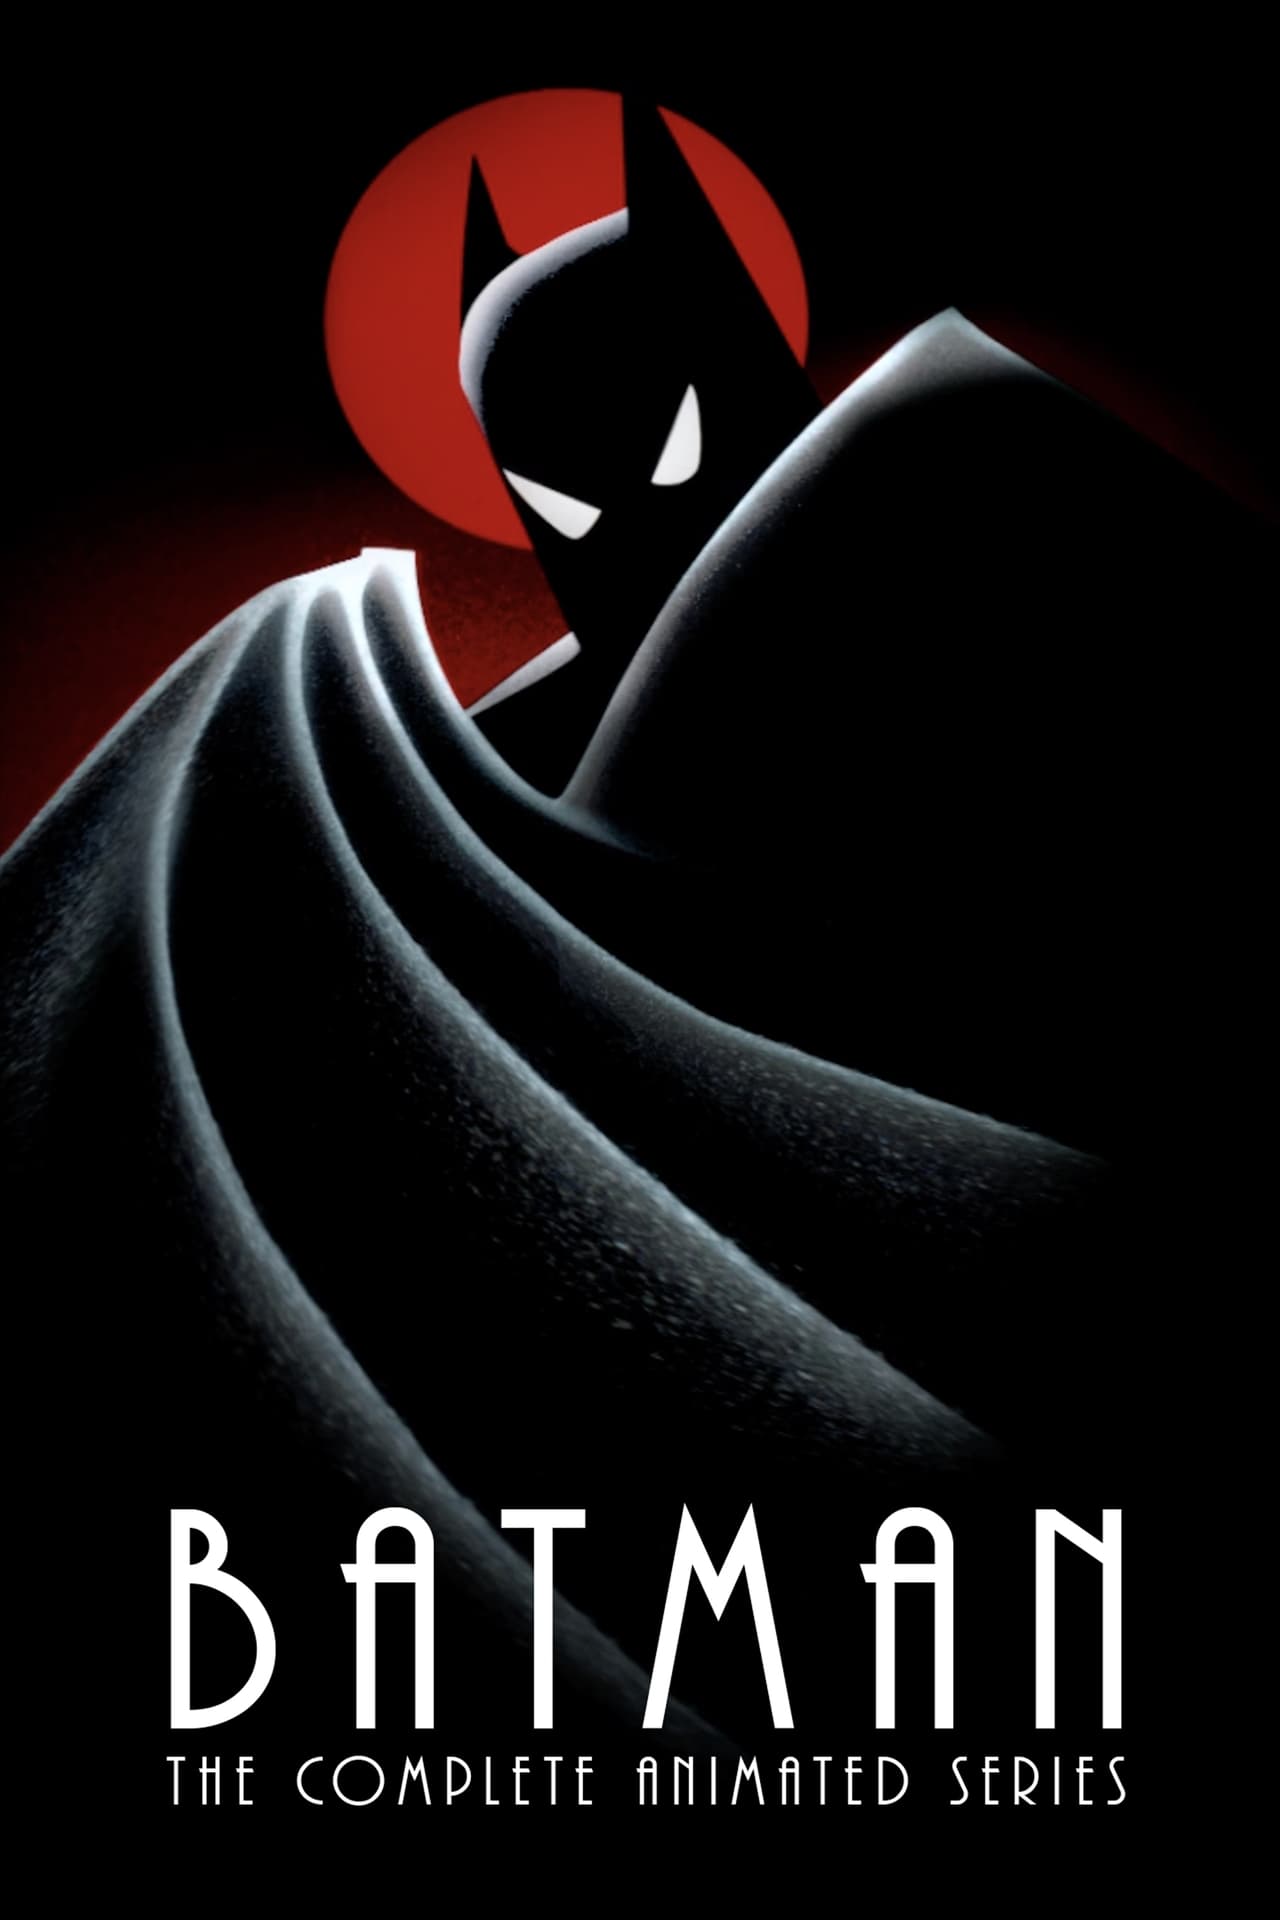 Batman: The Animated Series, Vol. 3 wiki, synopsis, reviews - Movies